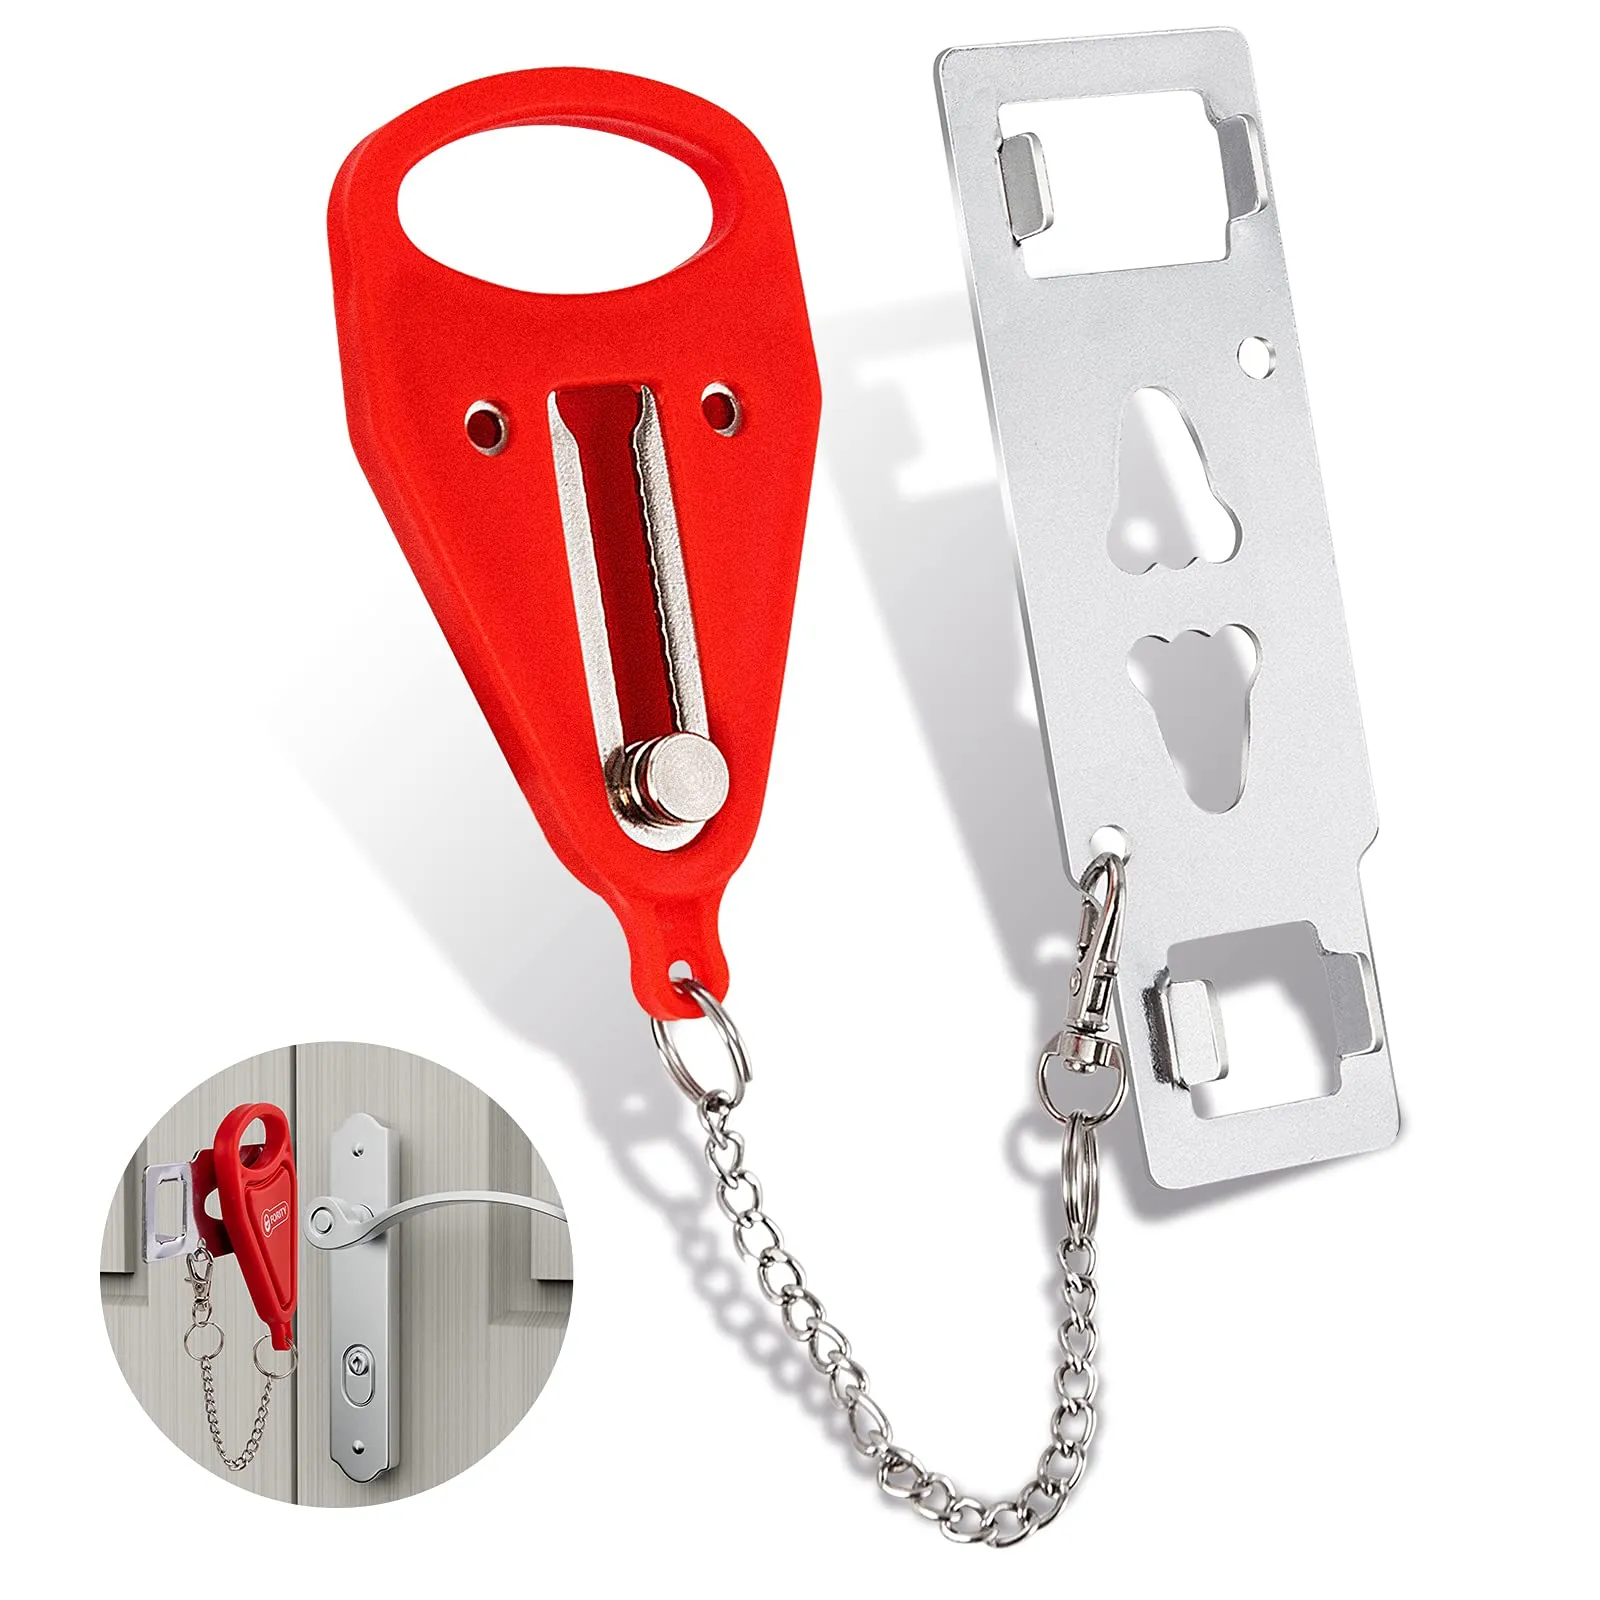 Portable Travel Doorlock For Airbnb, Bedroom, And Home Security Alarm Extra  Safety With Solid Remov Packing From Elsagirl, $2.05